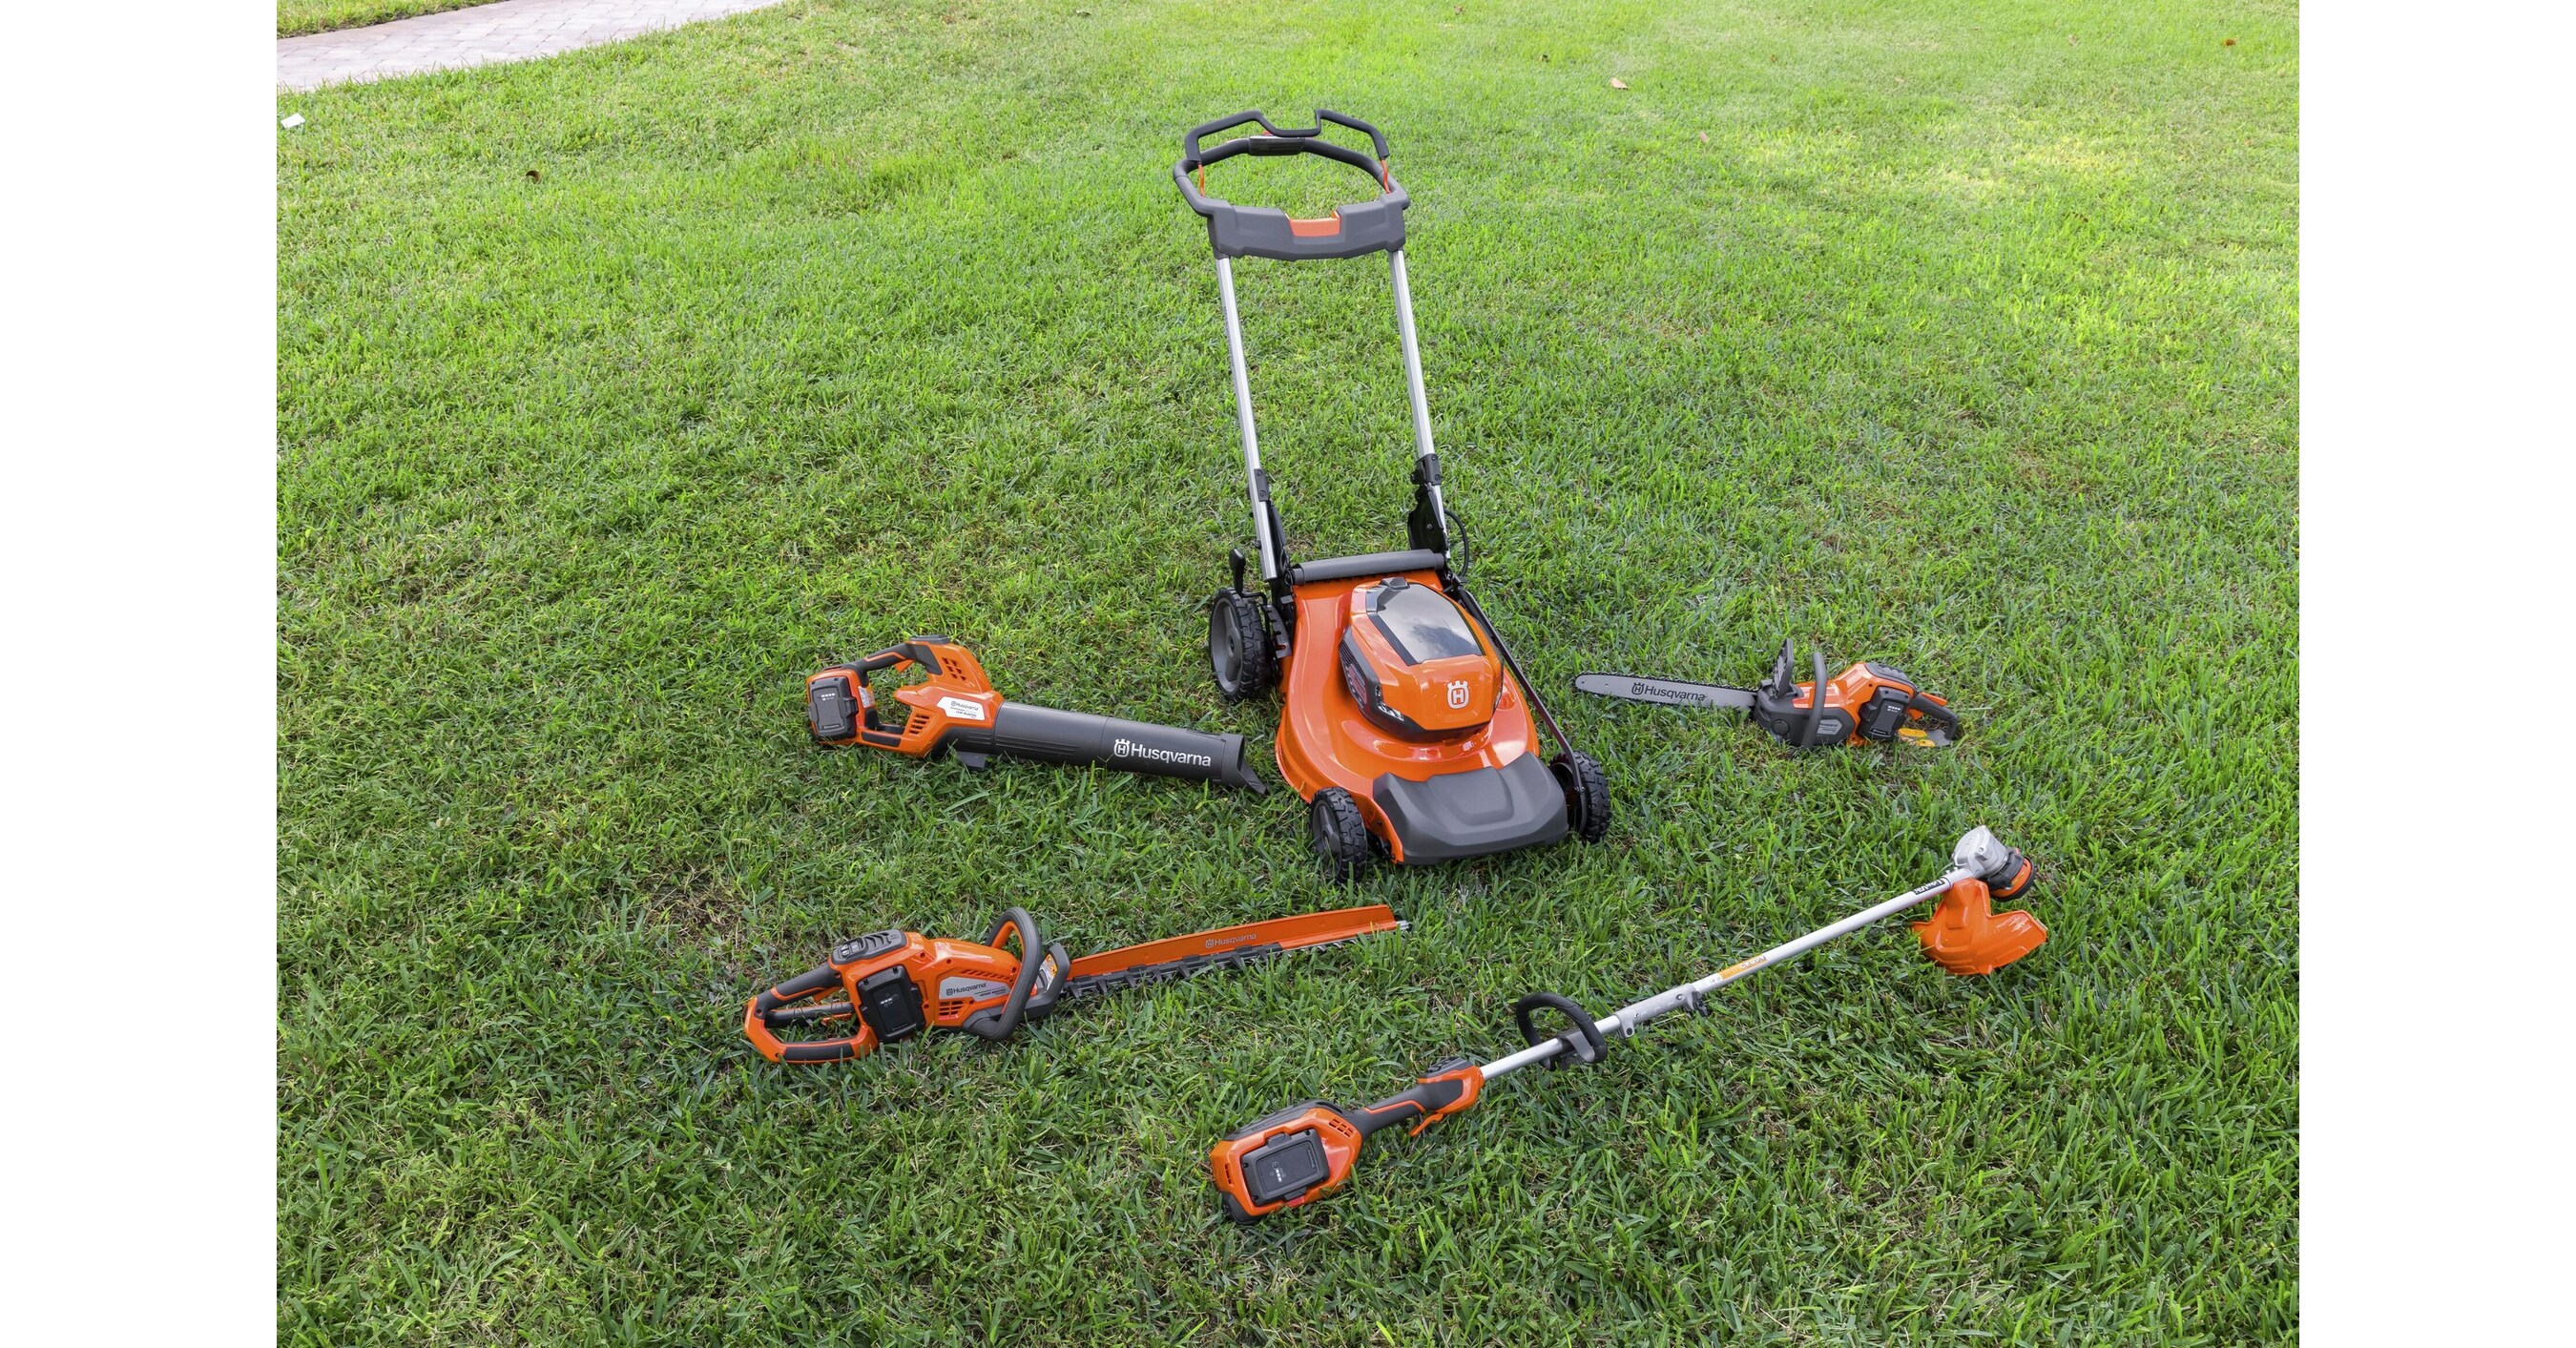 Husqvarna Launches Max Battery Series Product Line with Five New Tools That  Provide Homeowners Uncompromising Power and Performance to Tackle the  Toughest Yard Maintenance Jobs